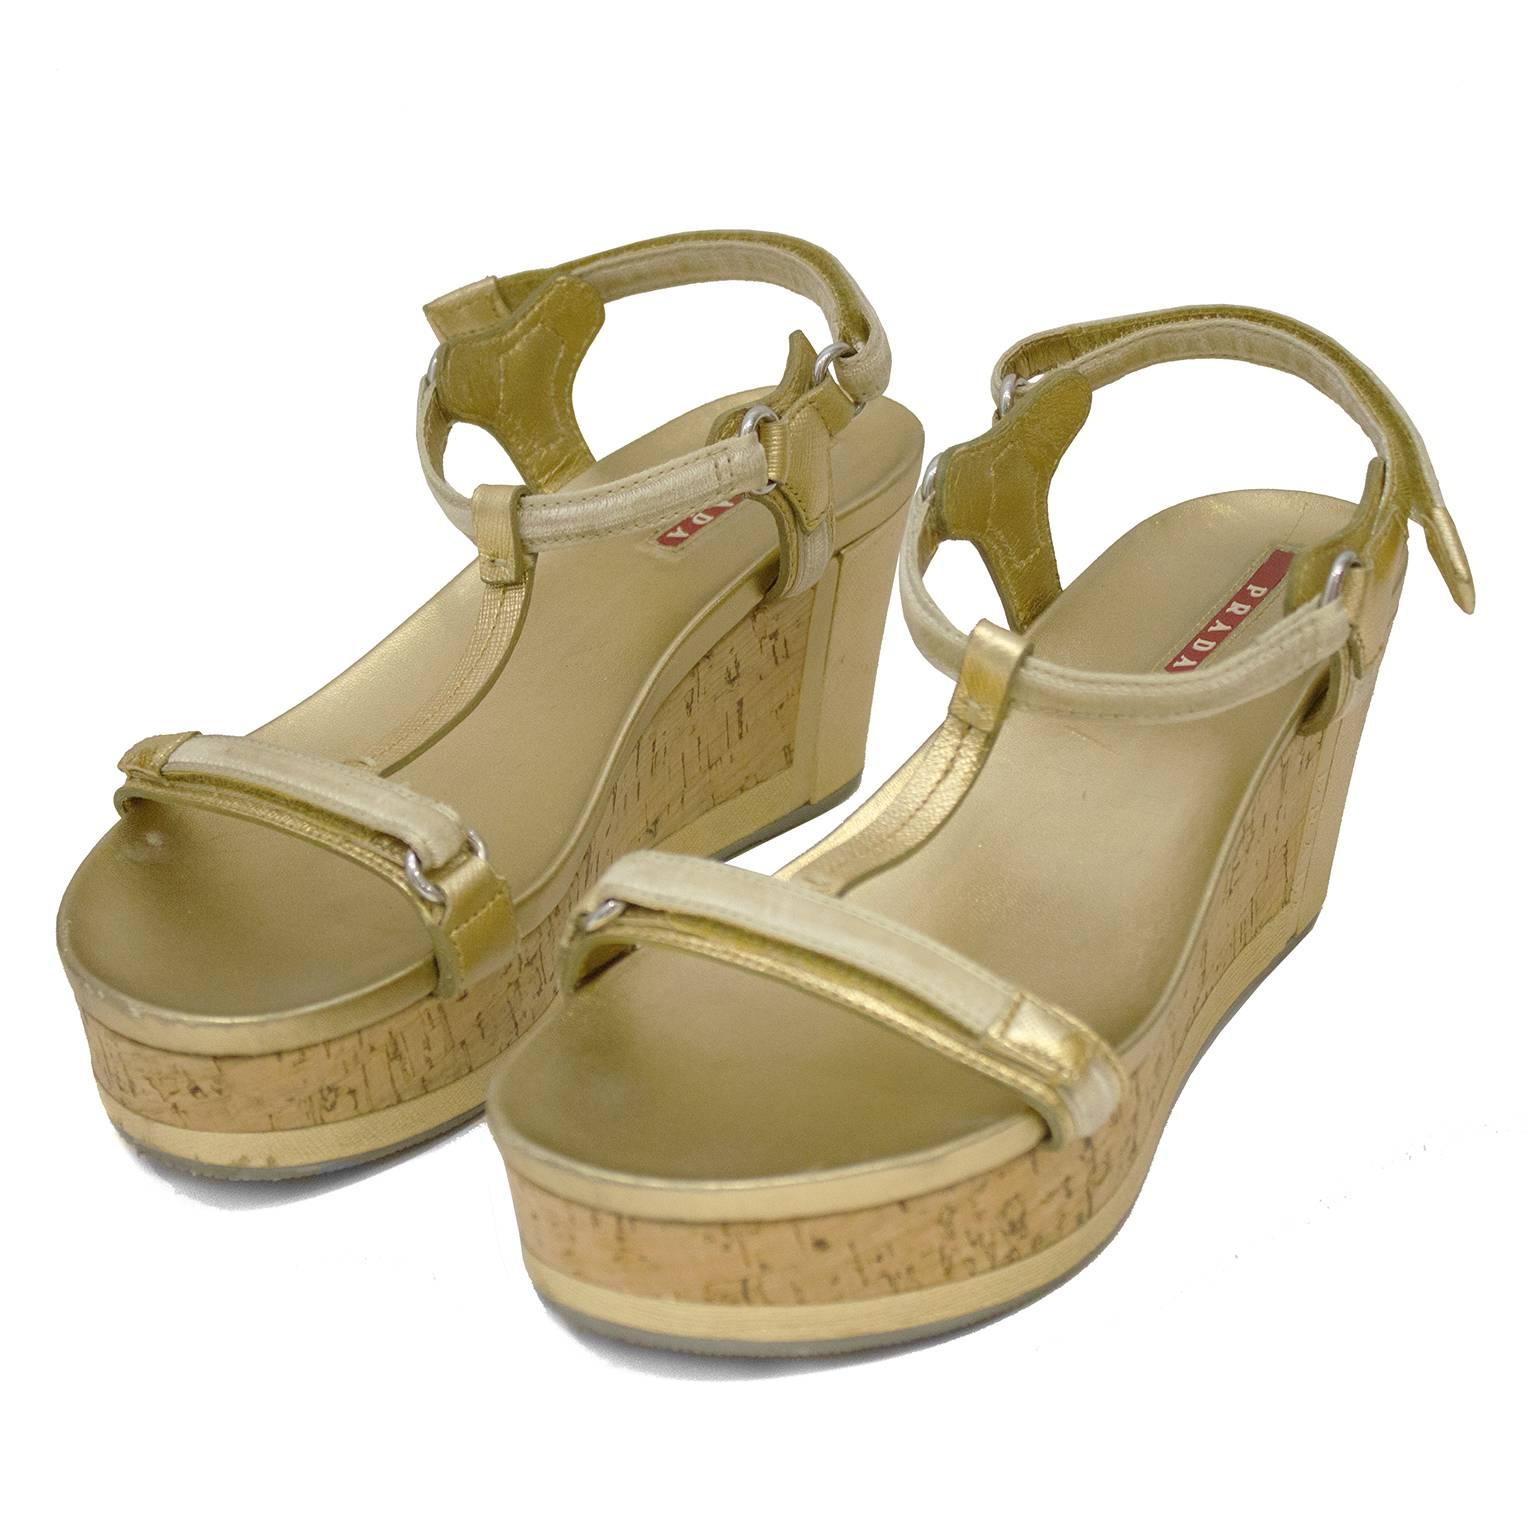 T strap gold leather platform sandals by Prada Sport from the 2000's. The cork sole is accented with a gold leather panel along the heel and the ankle straps fasten with velcro. Cream velvet details along the straps, silver hardware and grey